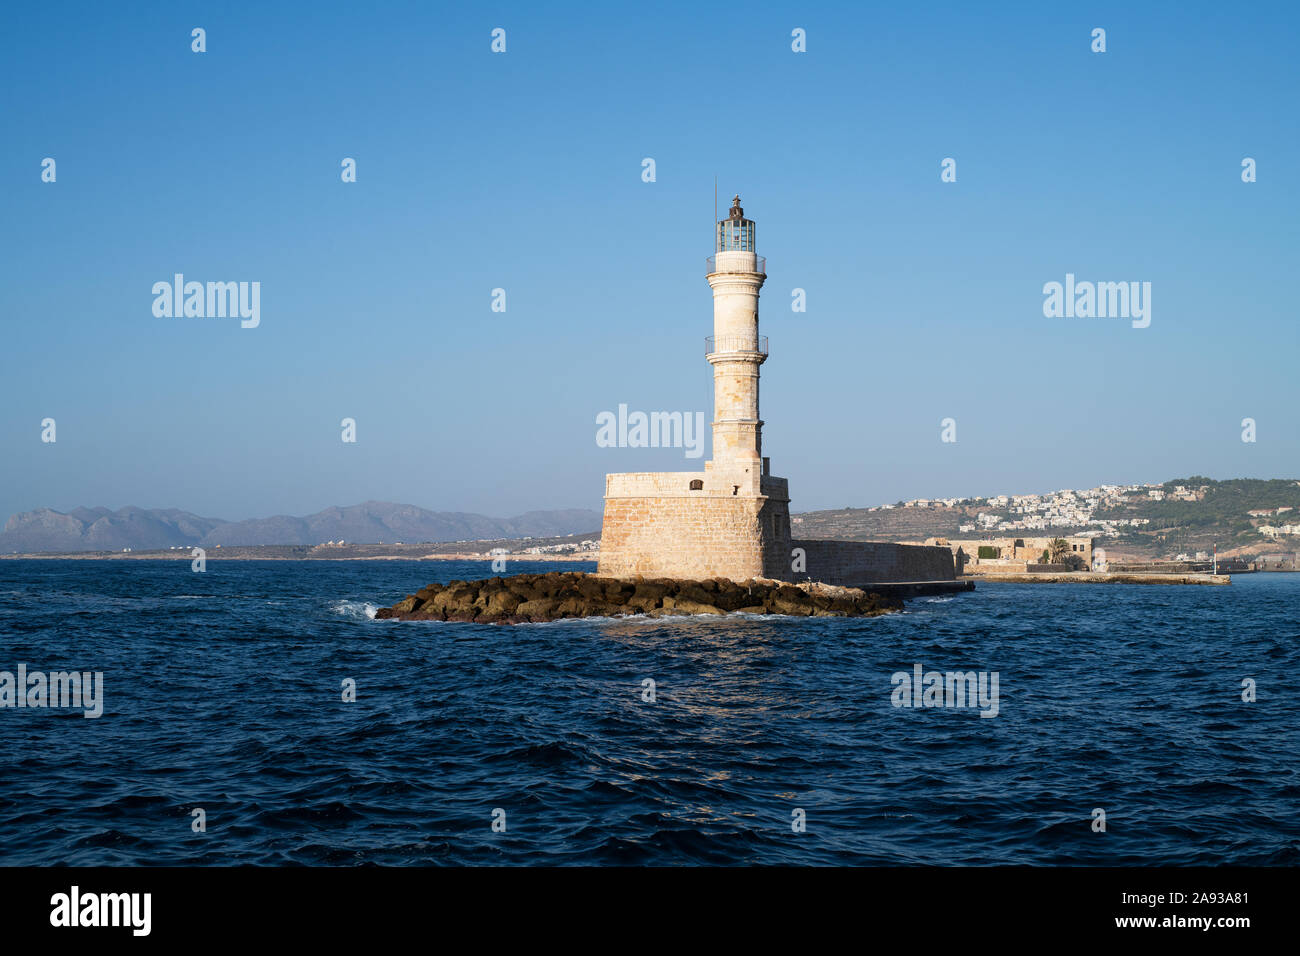 View of lighthouse on rocky island Stock Photo